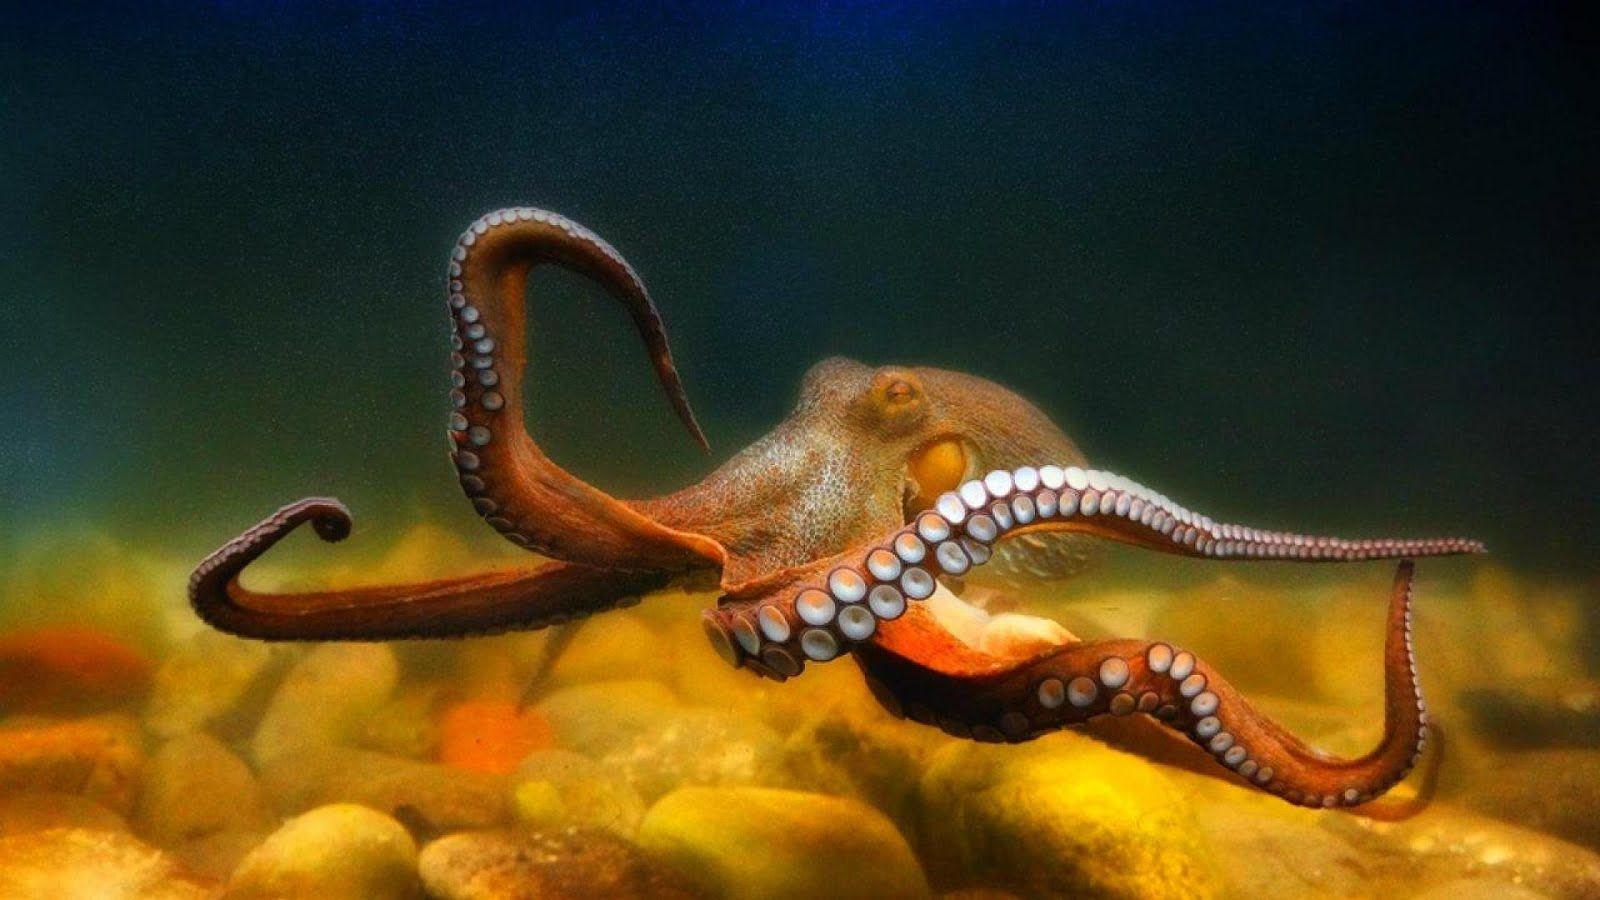 Underwater sea creatures and other animals Wallpaper. SEA LIFE